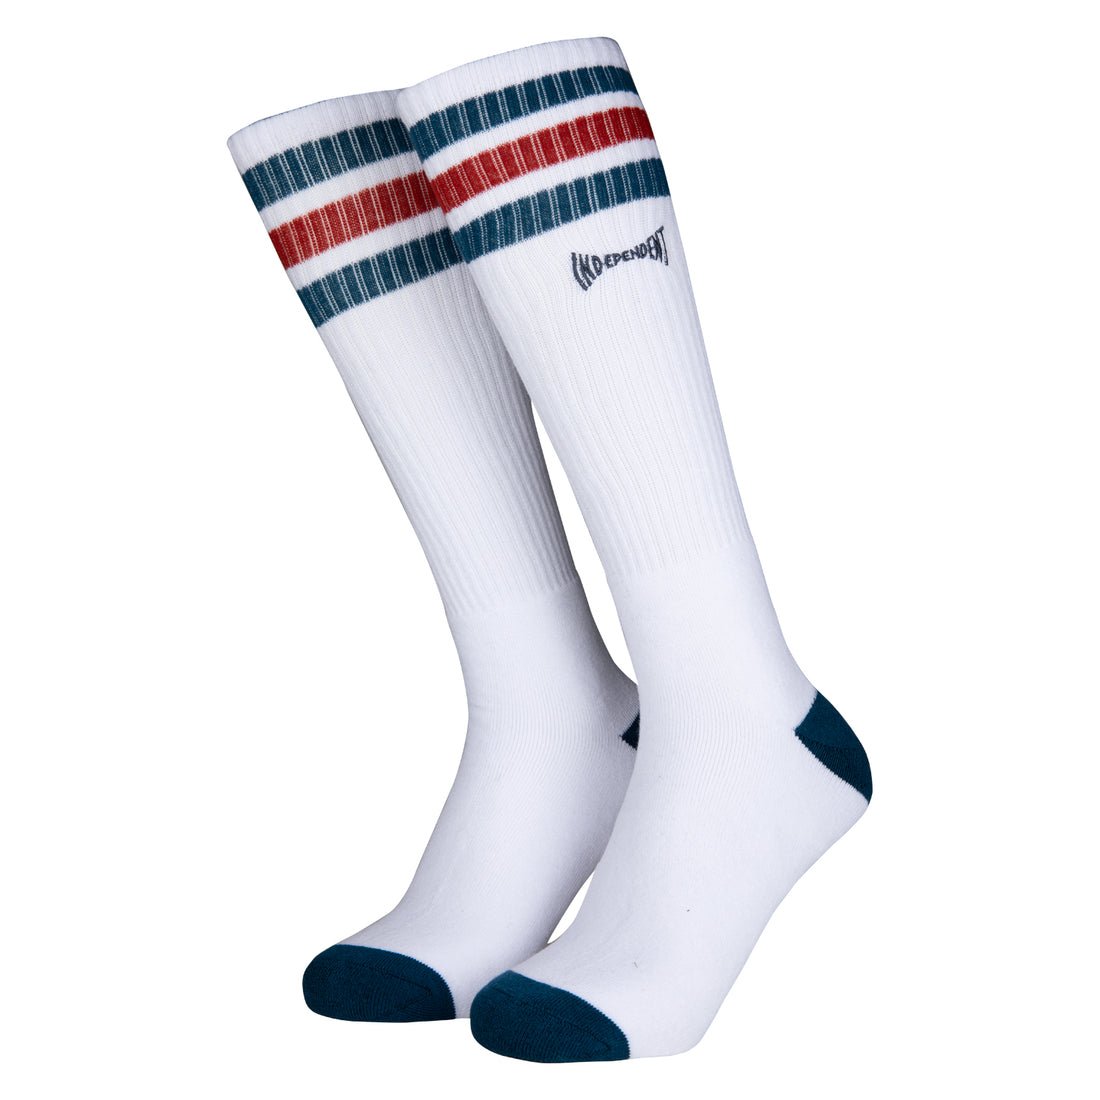 Independent Span Tall Socks